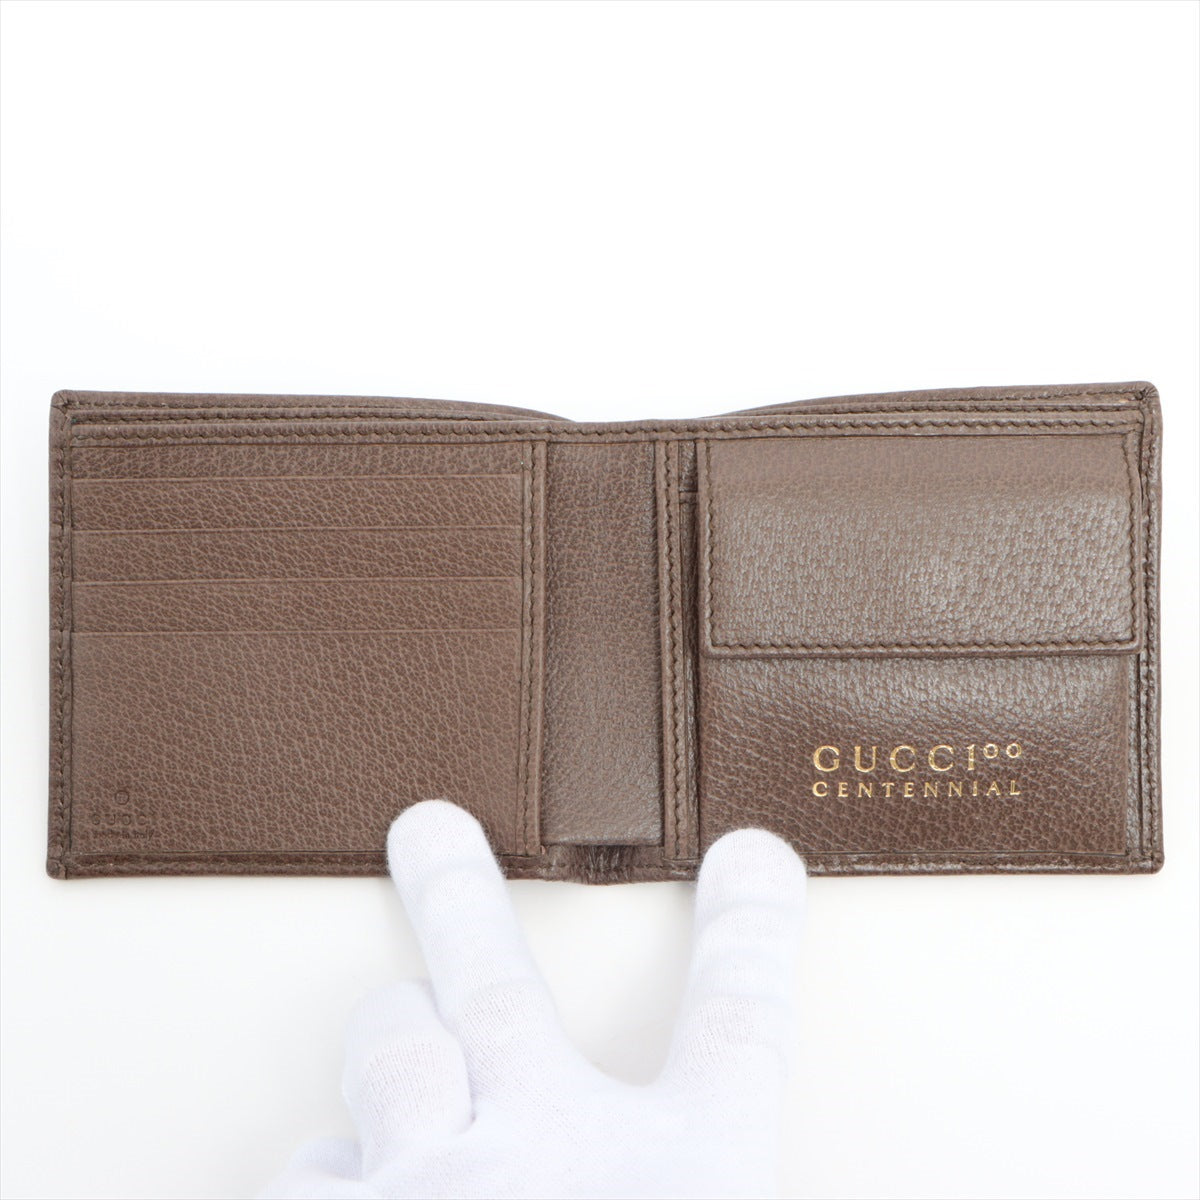 Gucci 676239 Leather Compact Wallet Brown